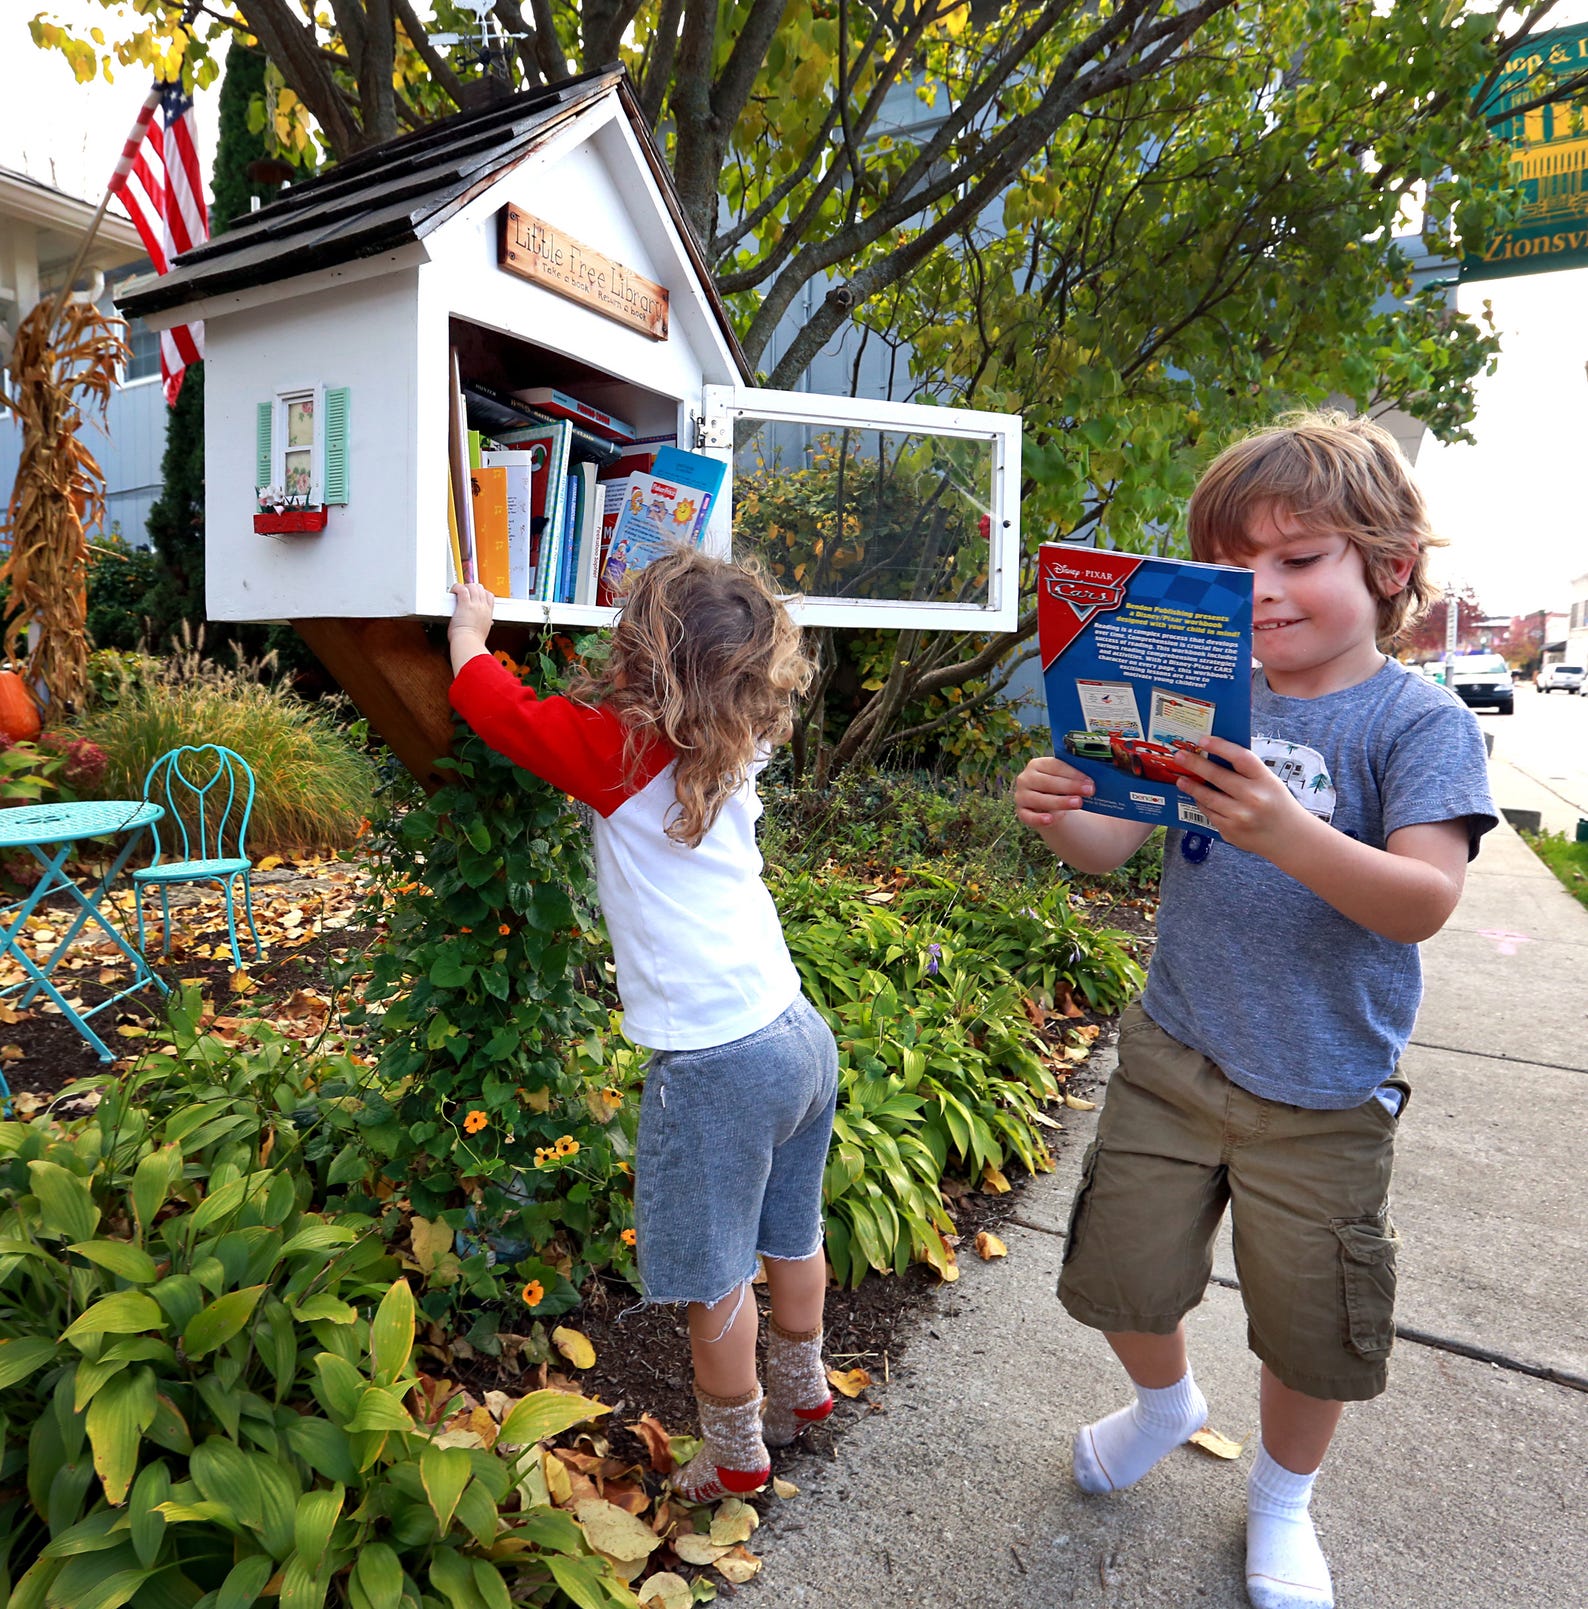 Little Free Libraries promote literacy, relationships